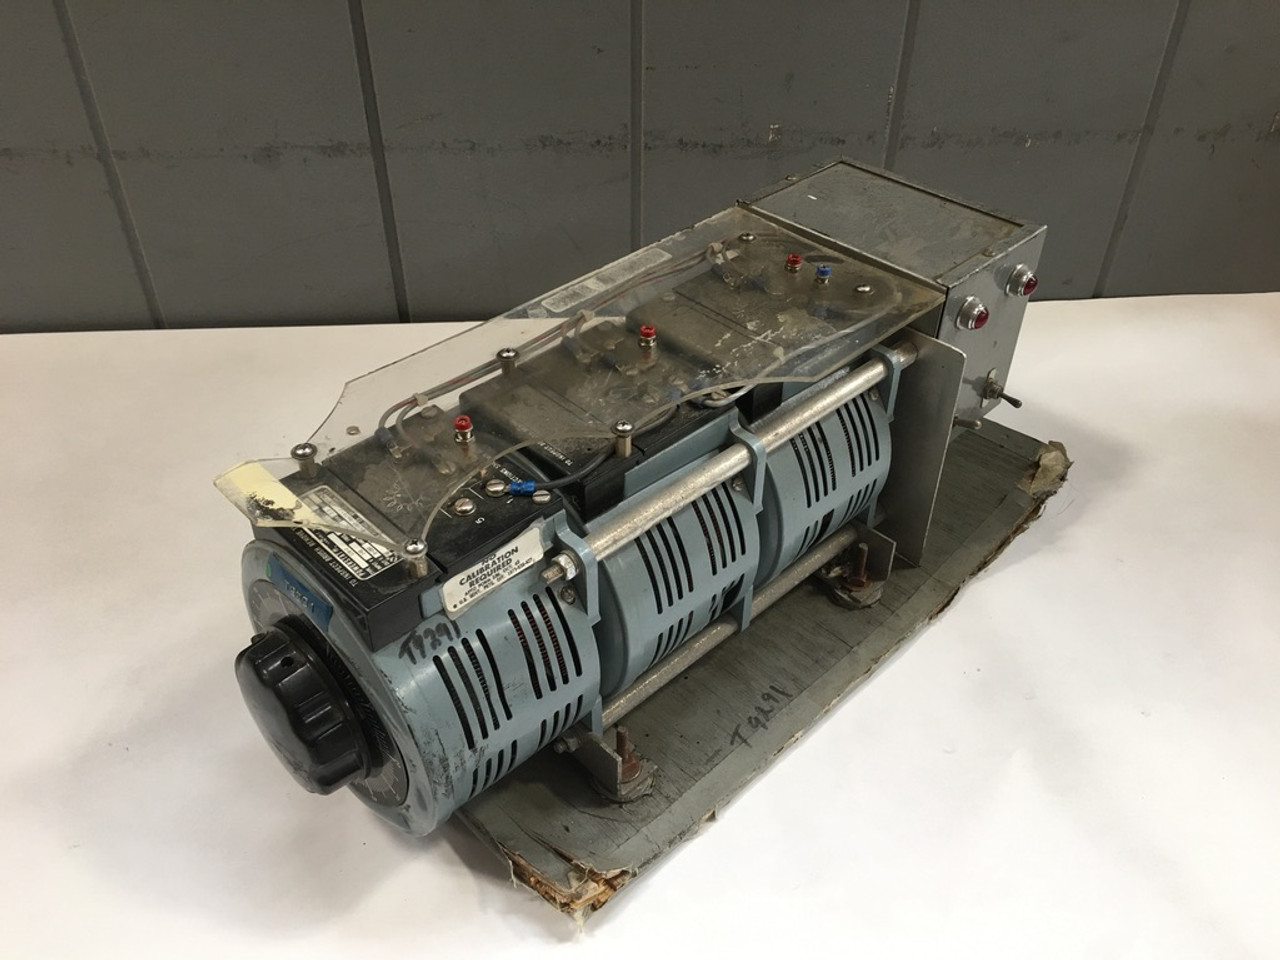 PowerStat Variable Auto Transformer Type 126-3 Superior Electric